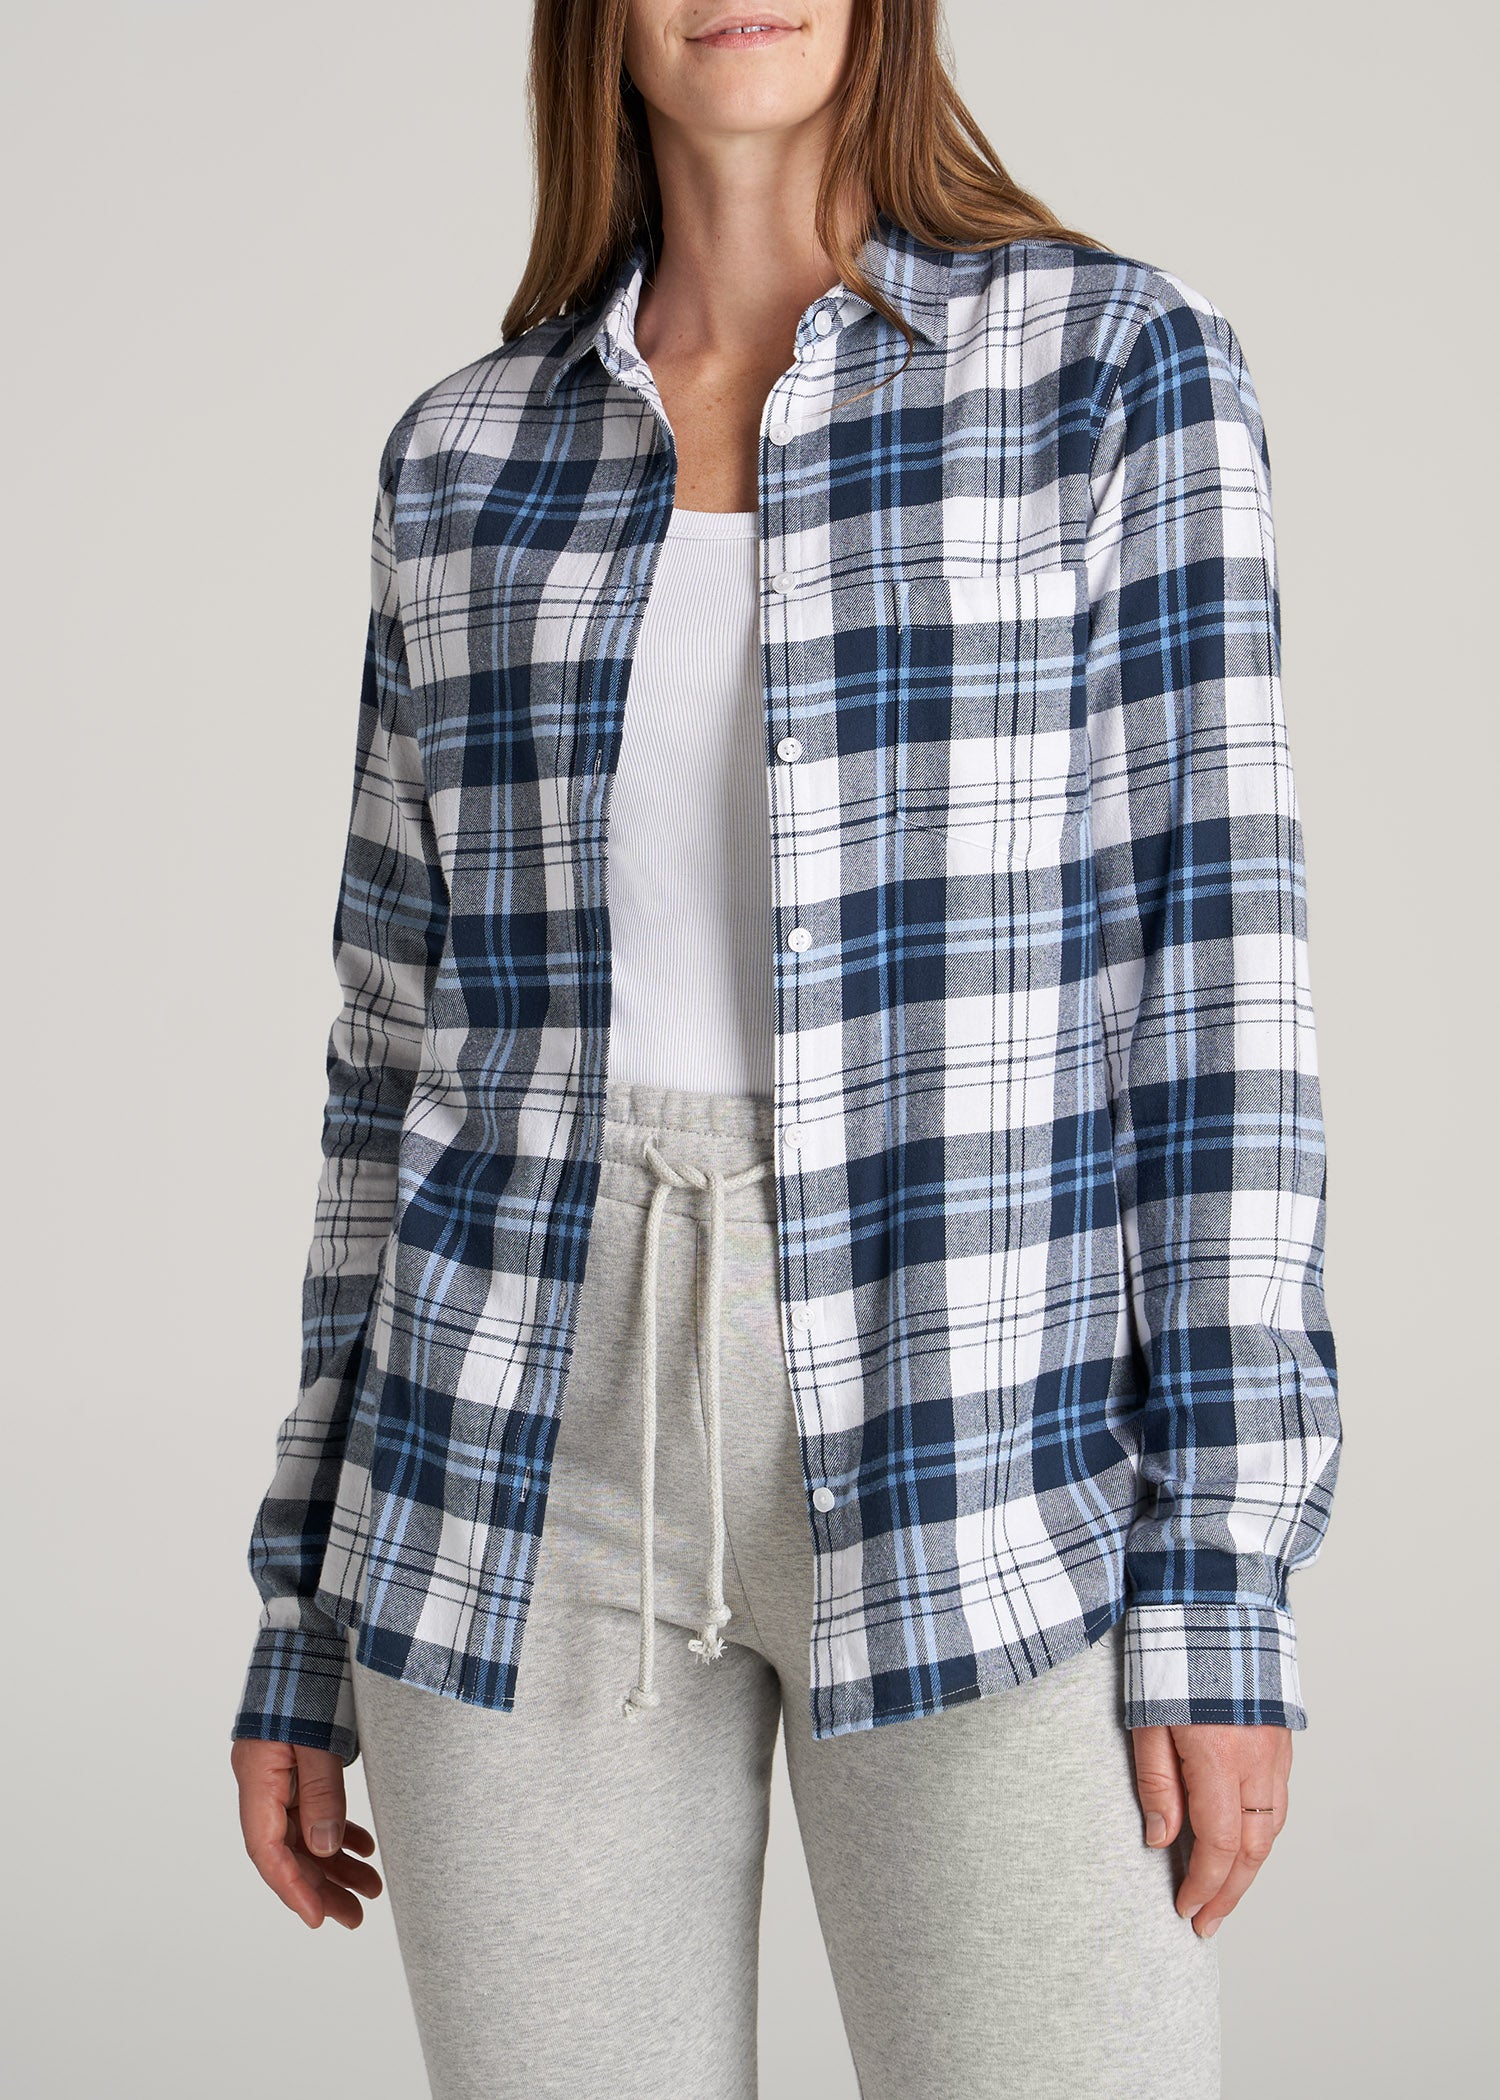    American-Tall-Women-Flannel-Button-up-Shirt-Blue-White-Plaid-front